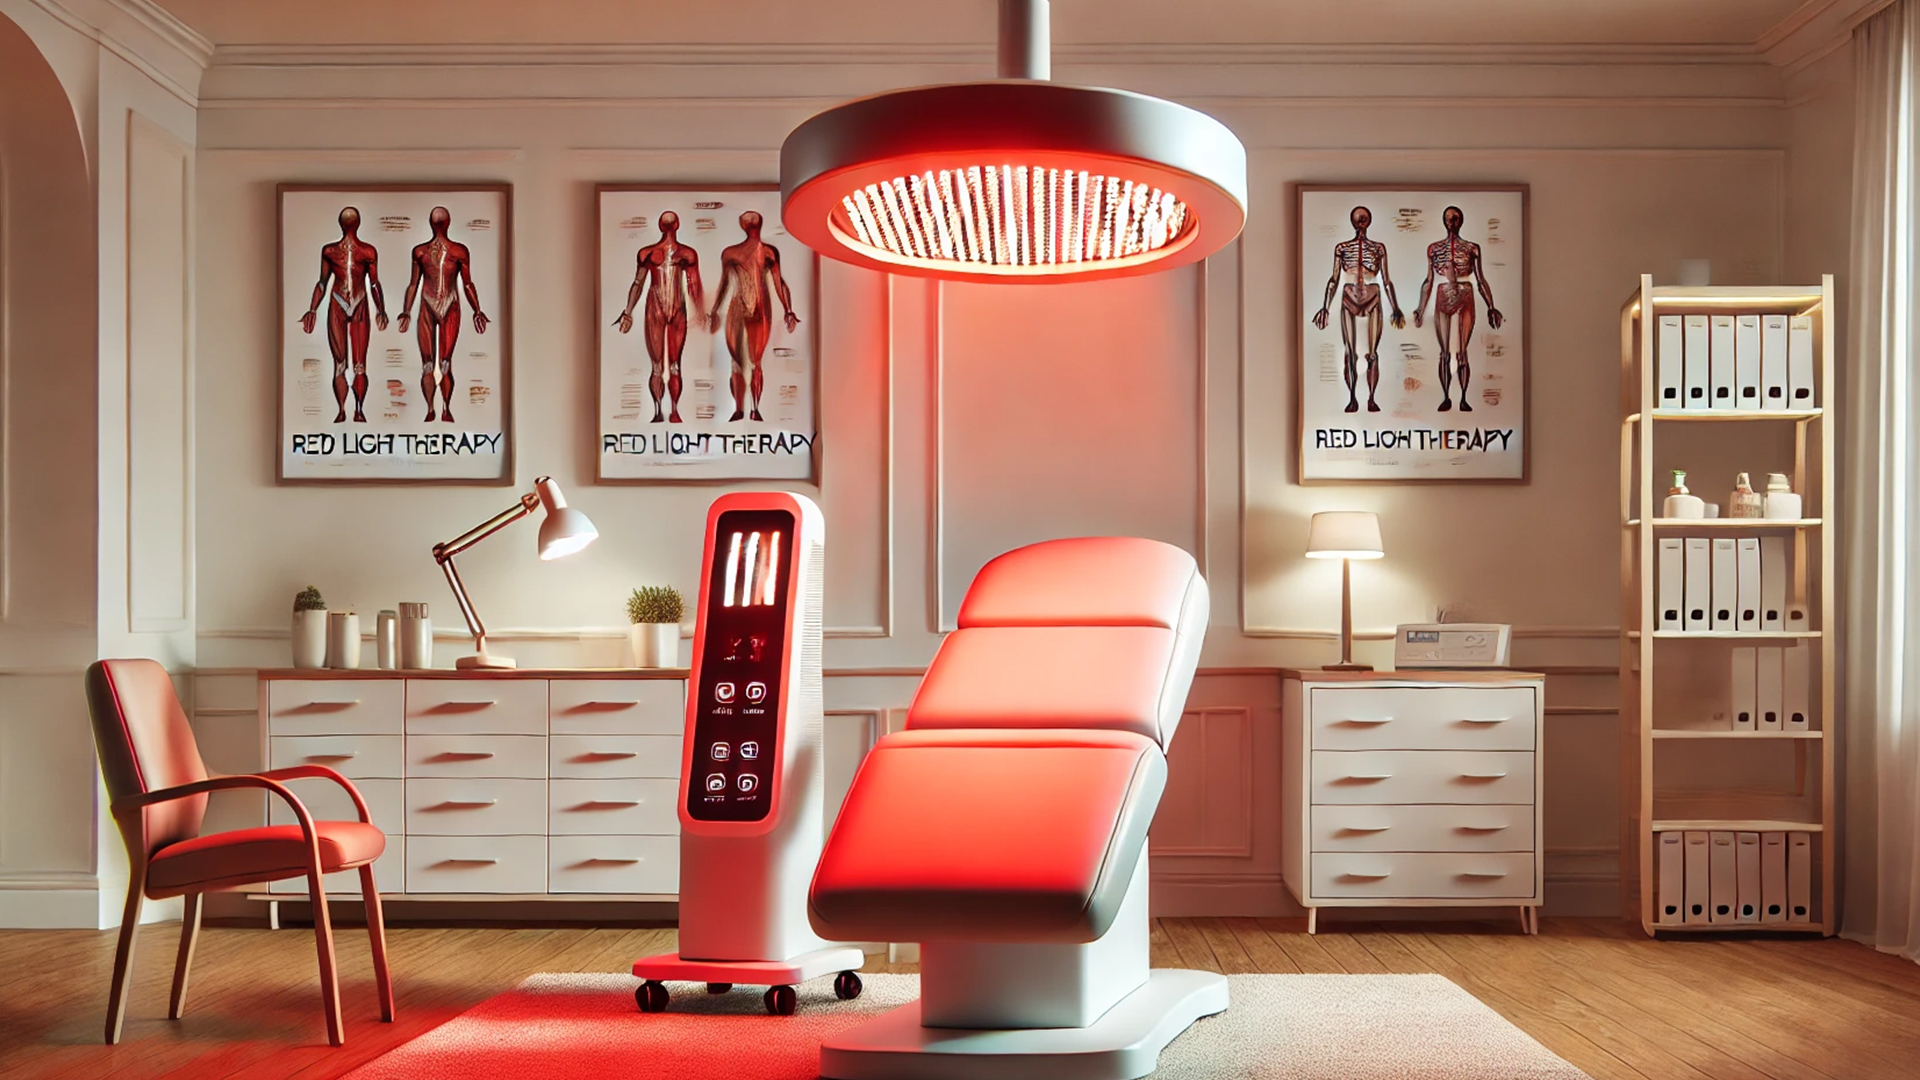 Can red light therapy cause cancer cells to grow